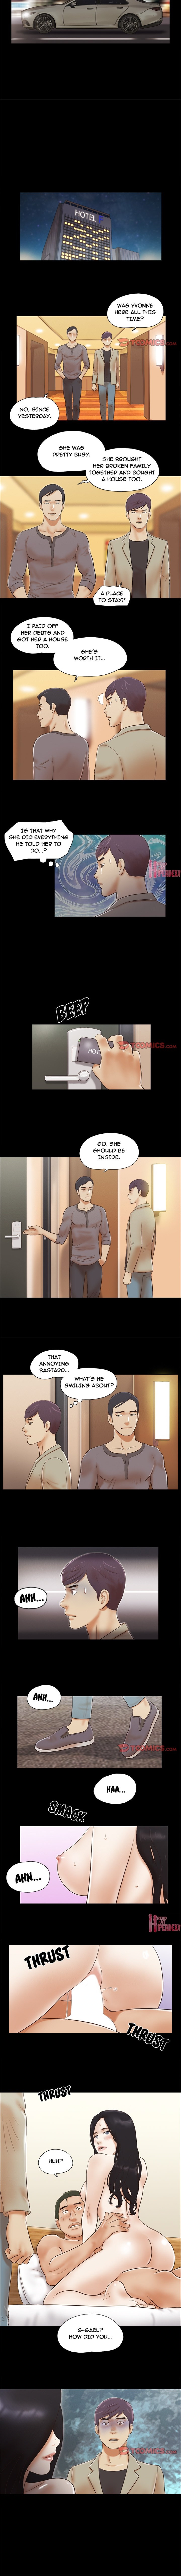 Inevitable Trap - Chapter 38 Page 3